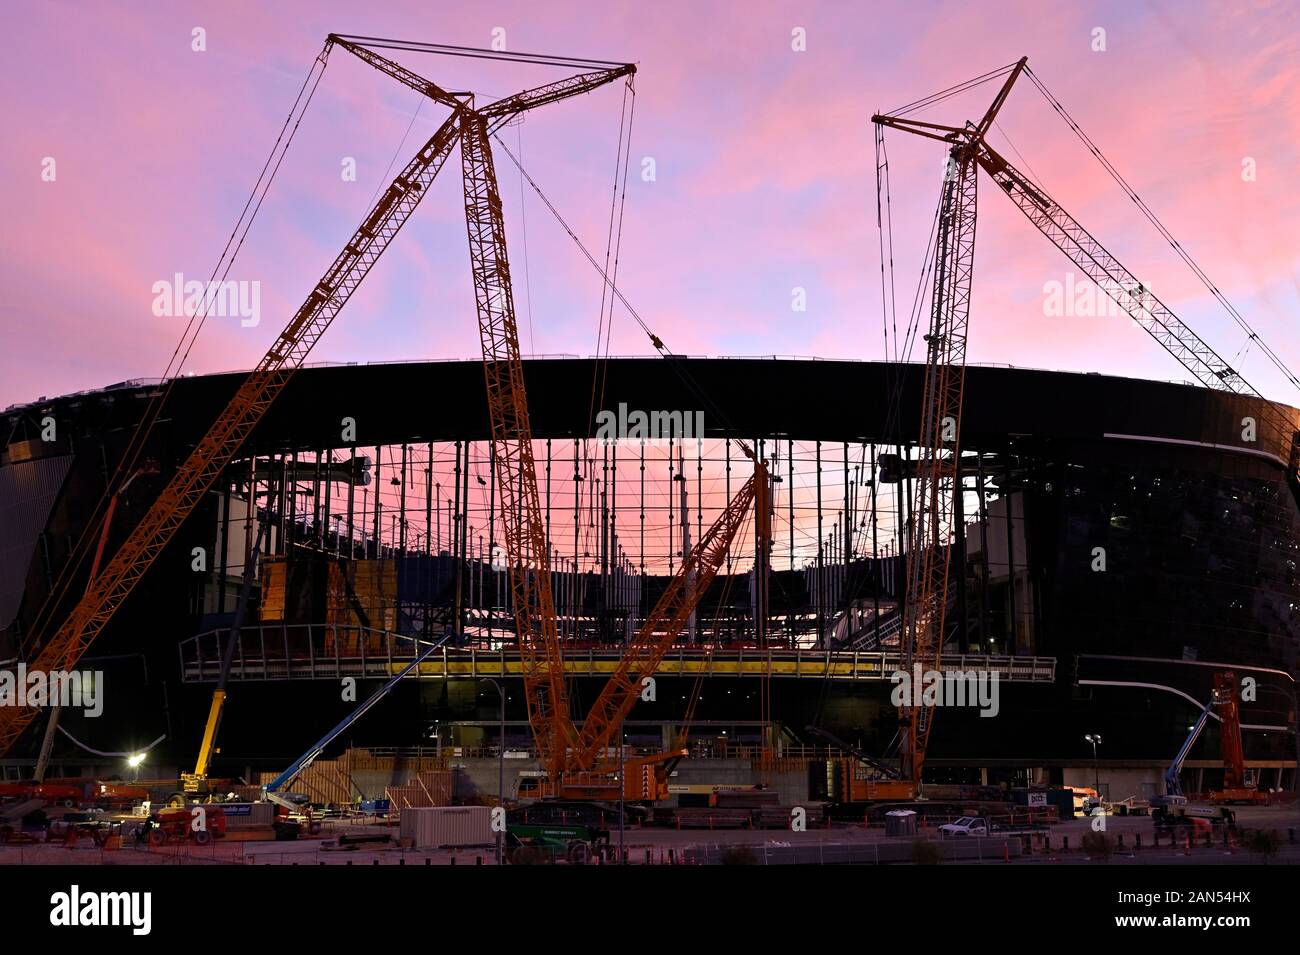 Las Vegas, Nevada, USA. 15th Jan, 2020. Allegiant Stadium is seen under construction as the sun sets on January 15, 2010 in Las Vegas, Nevada. The $1.8 billion domed stadium will home to the National Football LeagueÃs Las Vegas Raiders and the University of Nevada, Las Vegas Rebels college football team. Construction of the public and privately funded project began on September 18, 2017 and is scheduled to be completed in time for start of the 2020 NFL football season. Credit: David Becker/ZUMA Wire/Alamy Live News Stock Photo